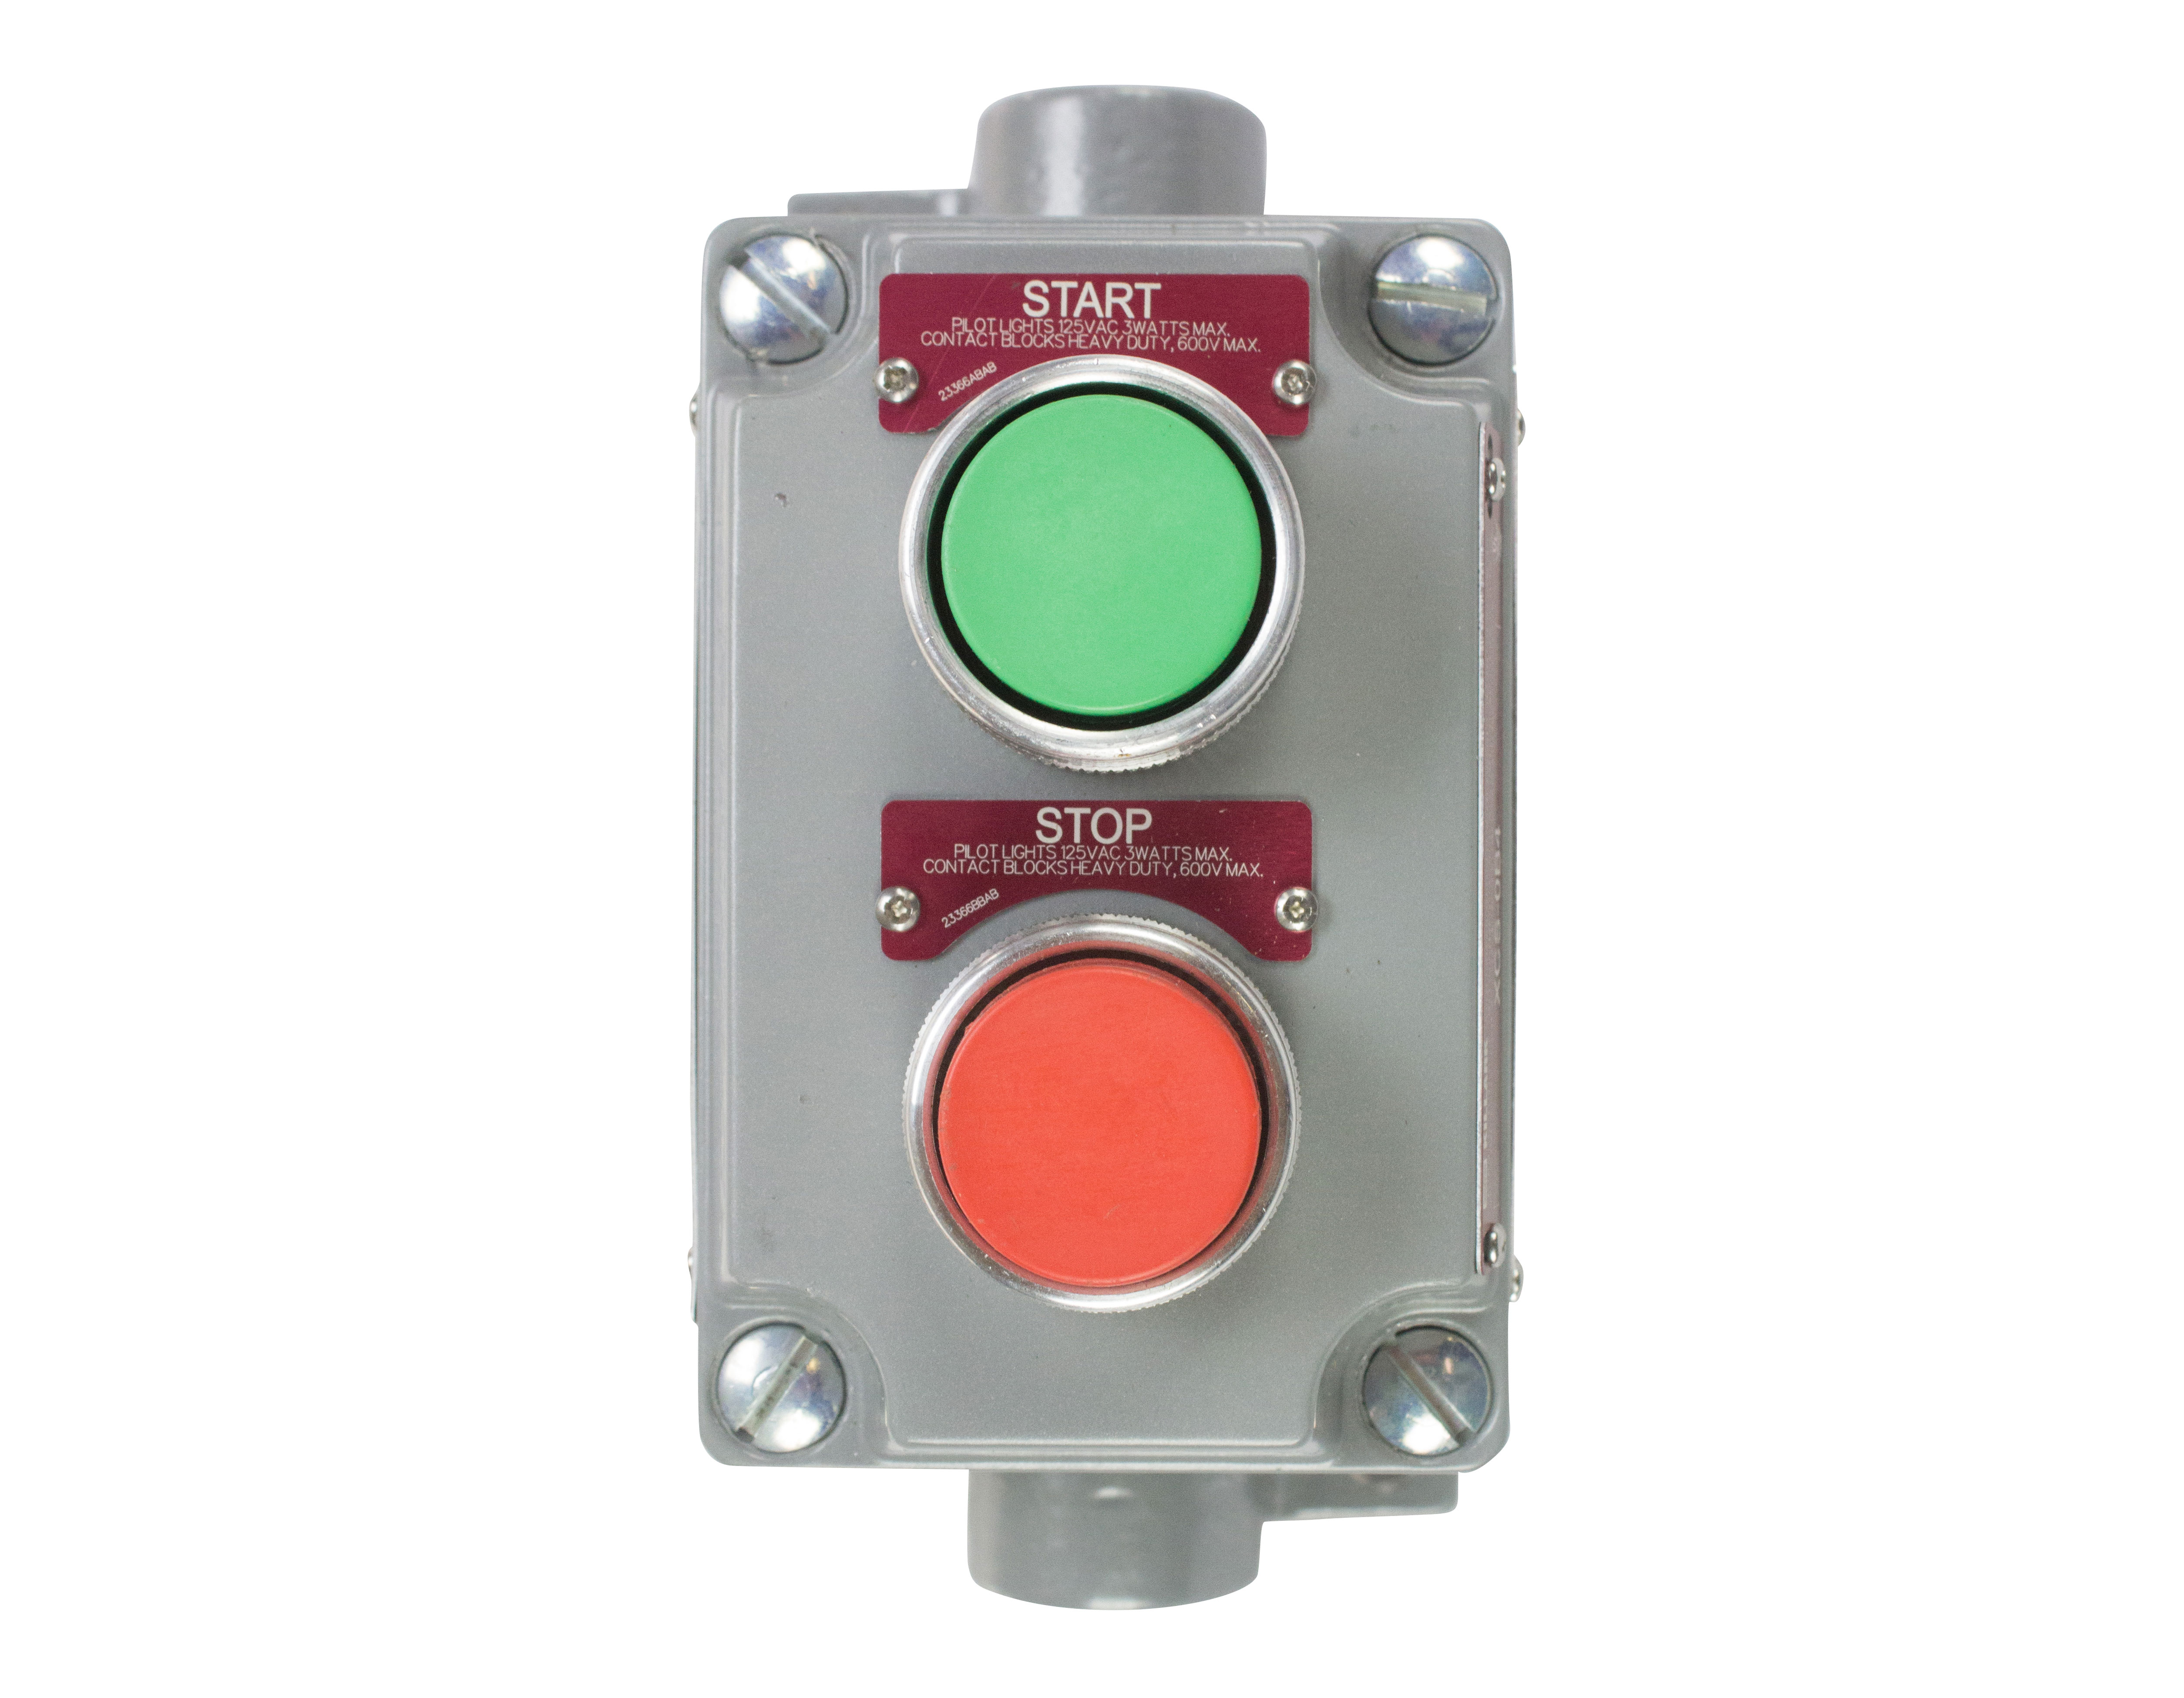 Class 1 Division 1 Explosion Proof Momentary Push Button